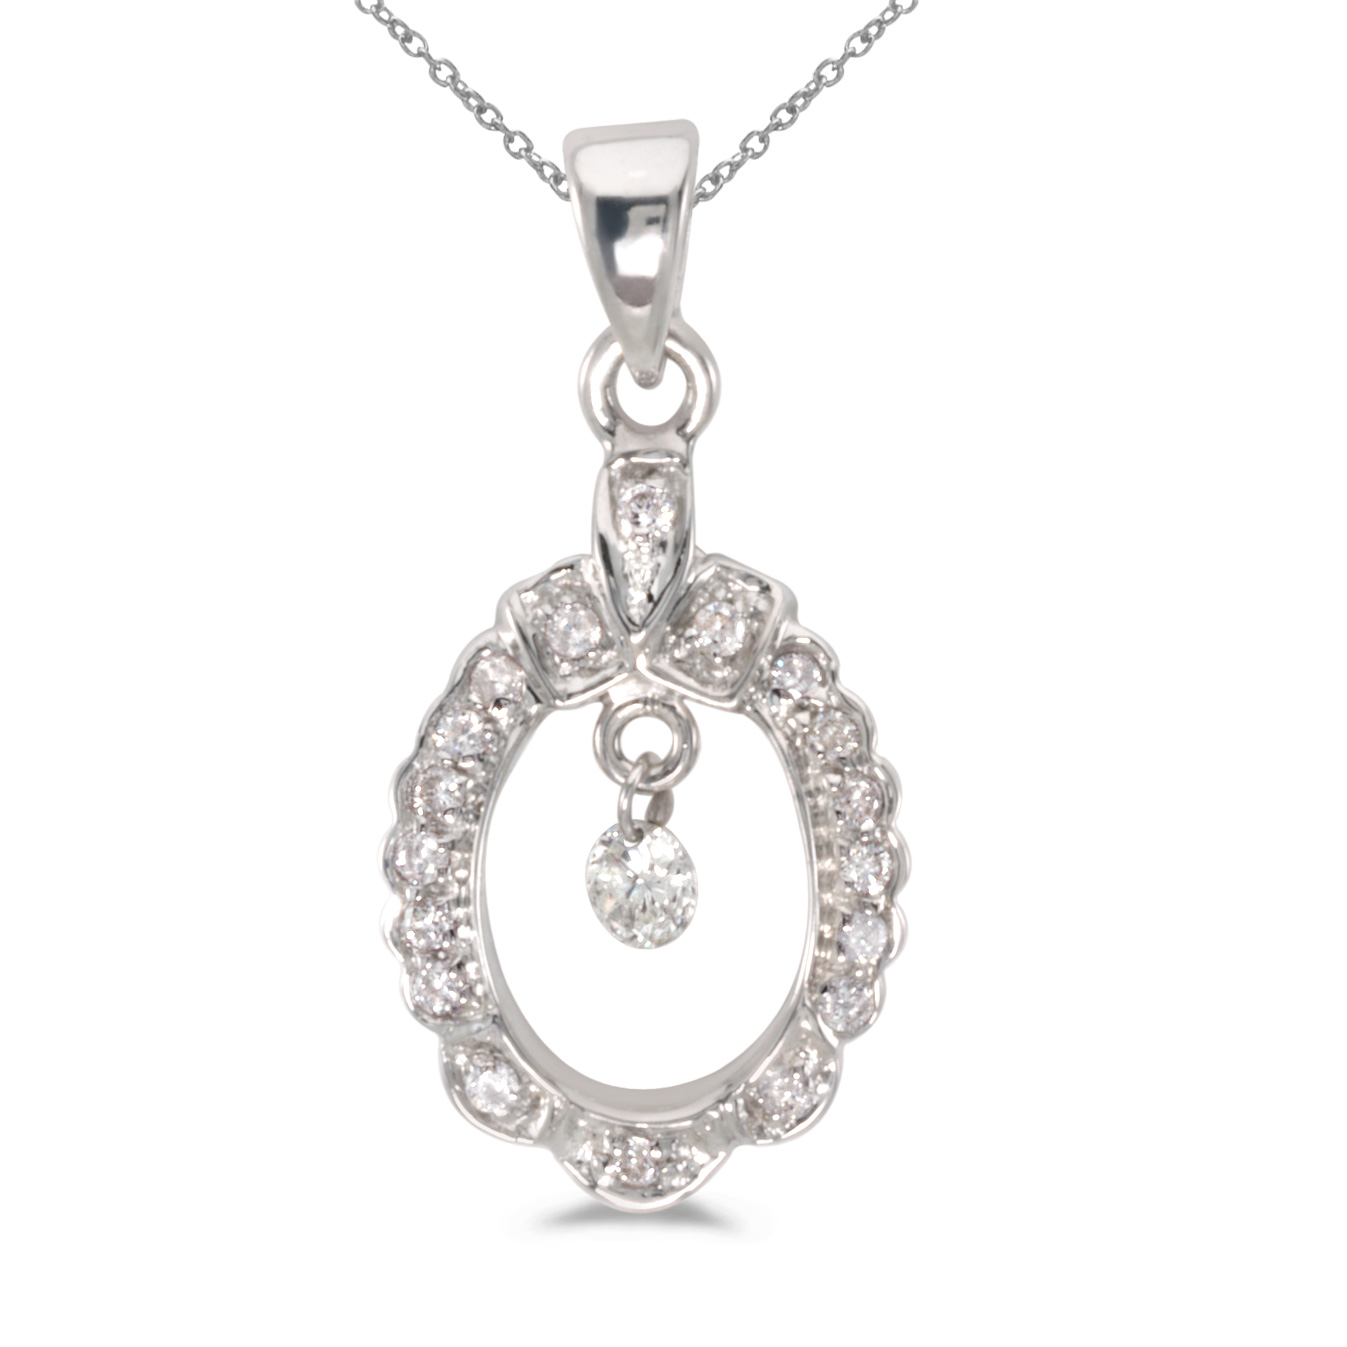 JCX2878: 14k gold Dashinng Diamonds pendant with 0.20 total ct diamonds. The center dangling diamond dances and shimmers with every heartbeat.